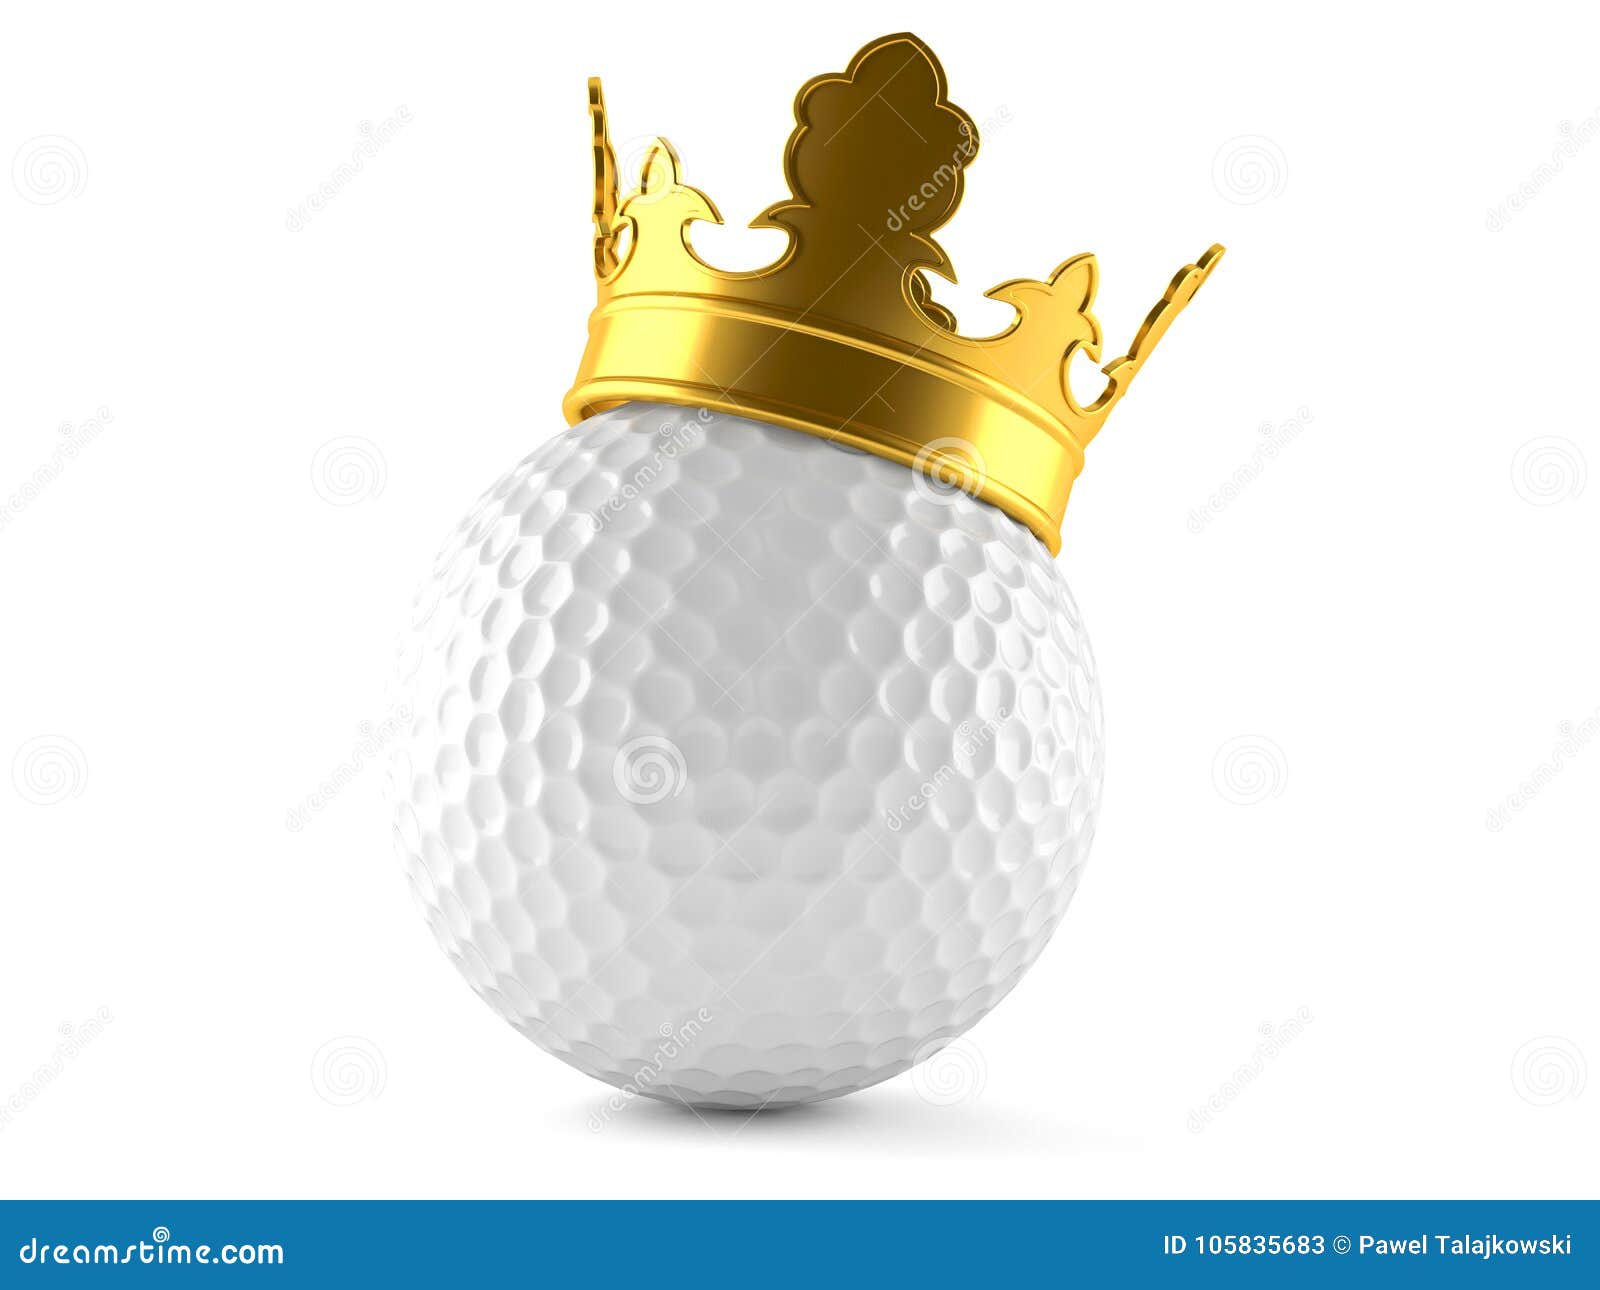 Golf ball with crown stock illustration. Illustration of golden - 105835683